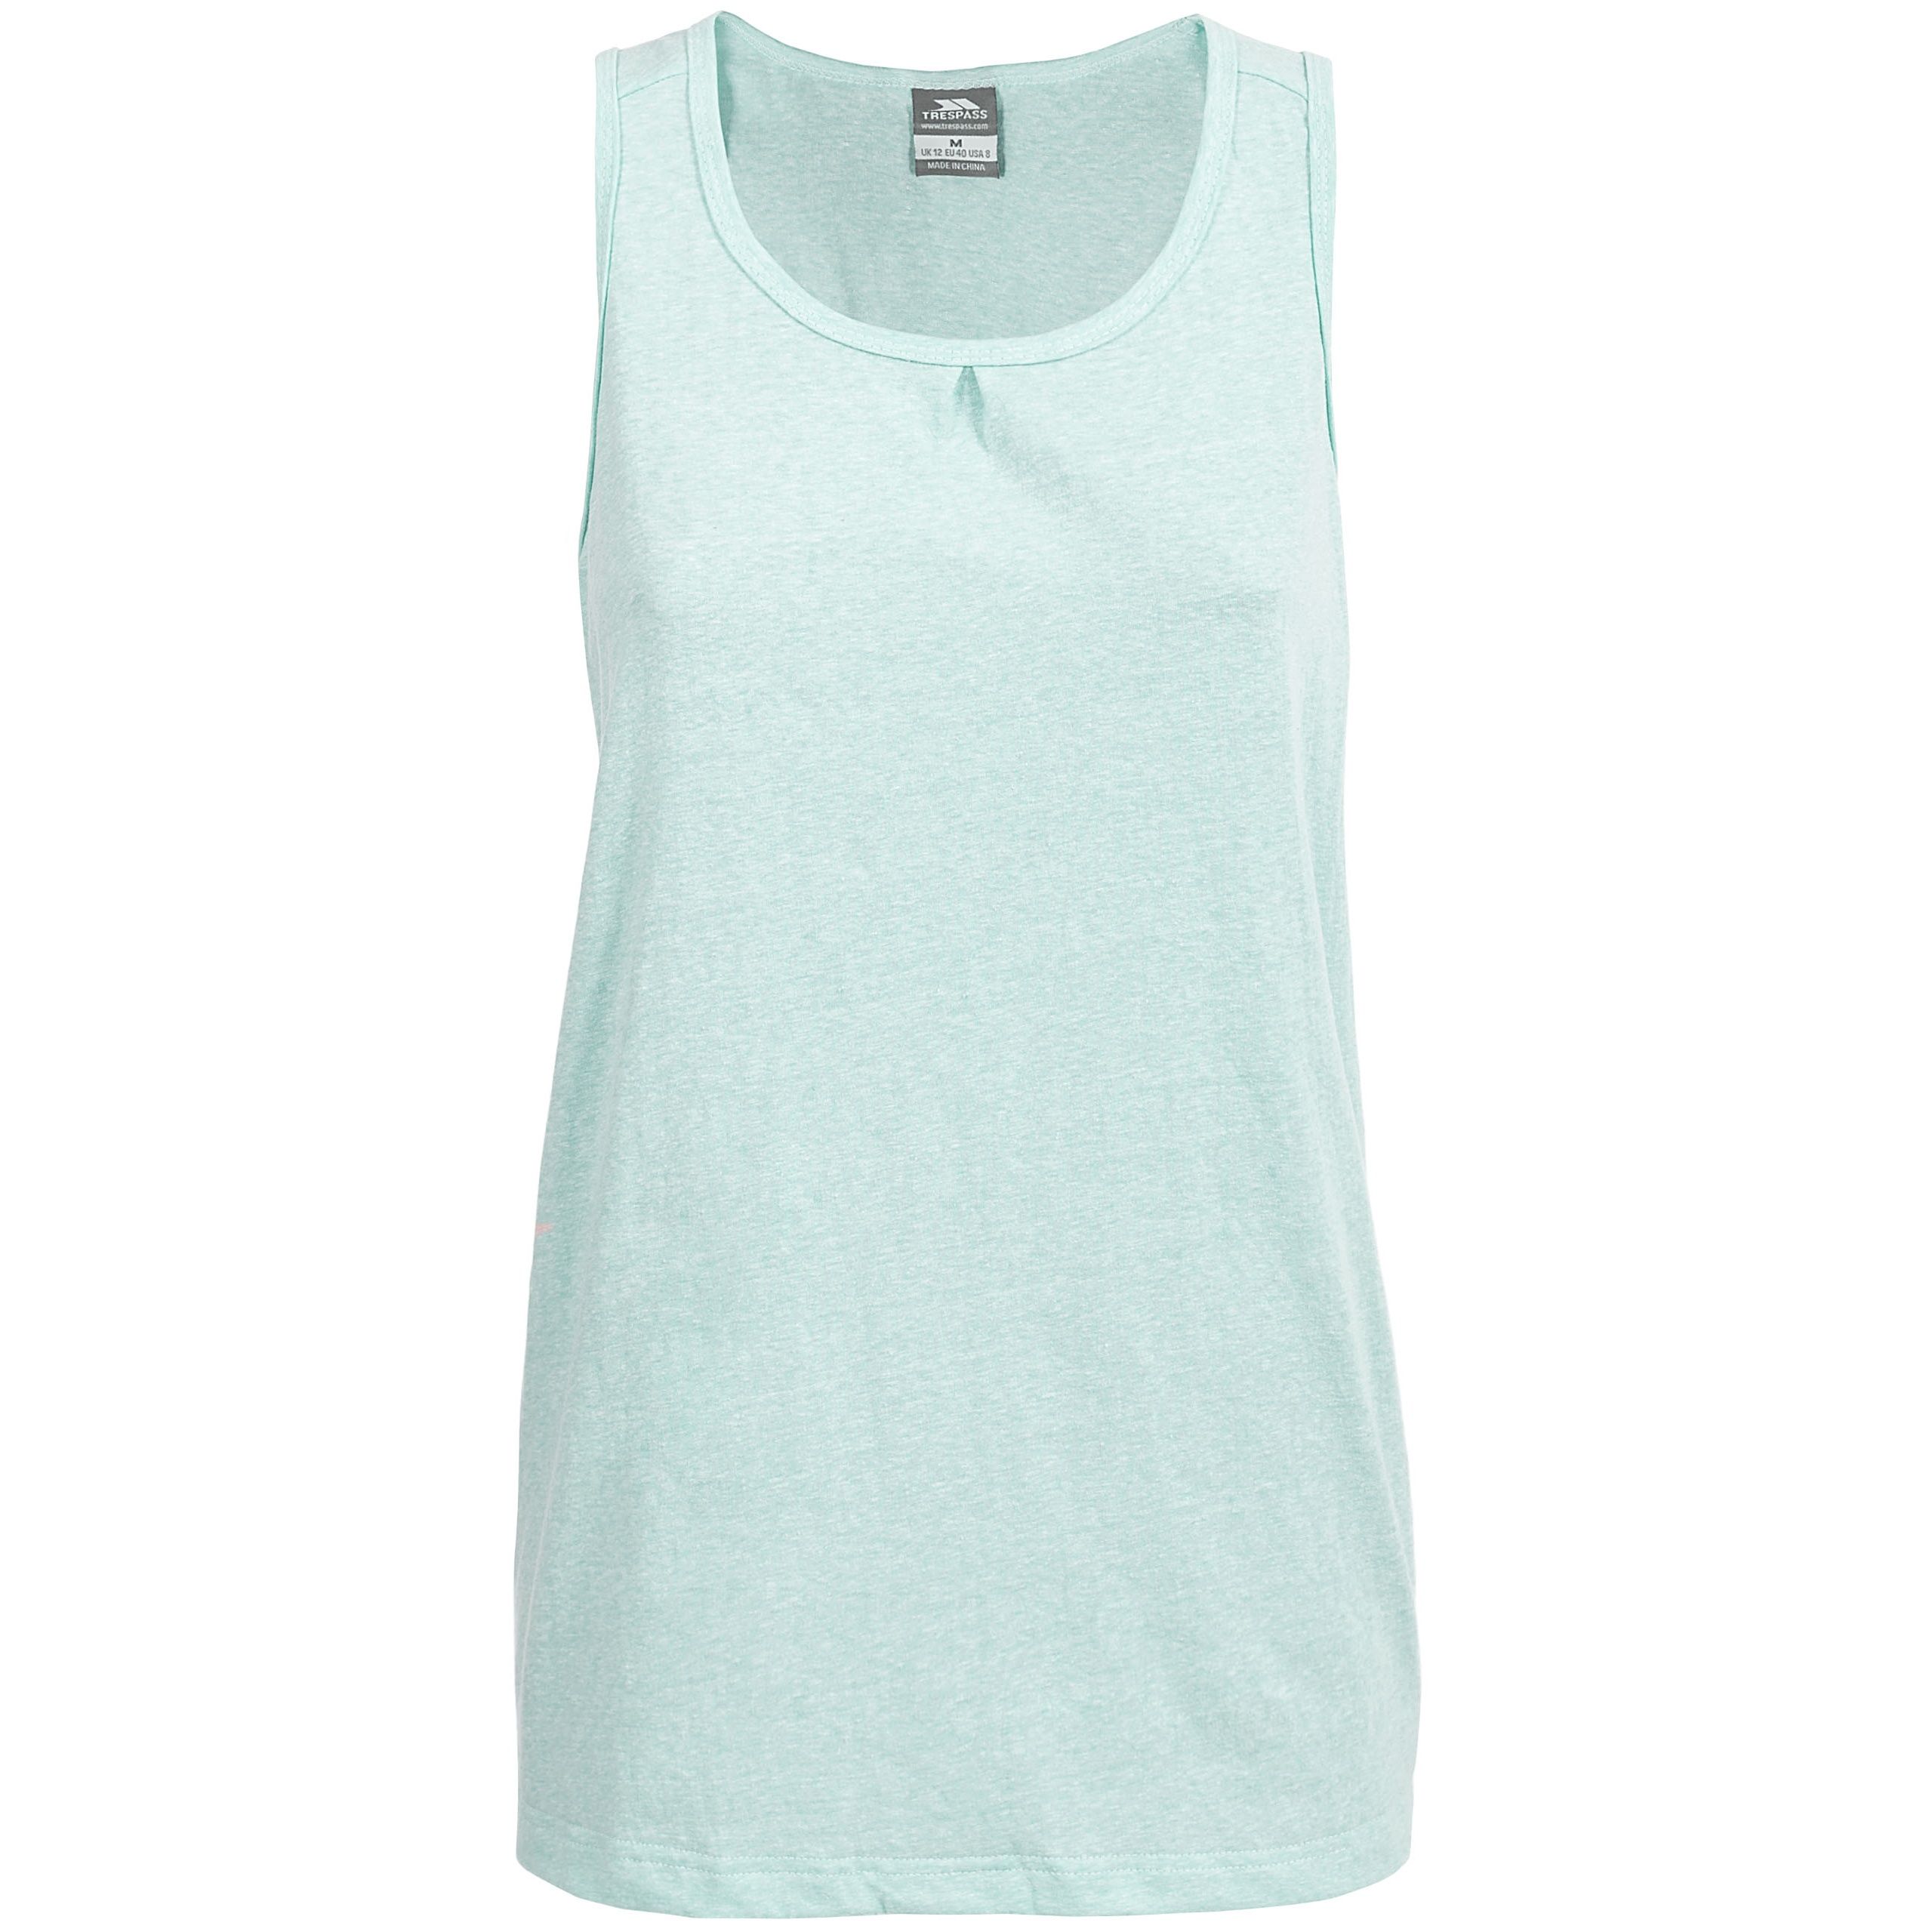 Marl slub fabric. Vest top. Scooped neck. Binding at neck and armhole. Quick dry. 130gsm. 60% Cotton, 40% Polyester. Trespass Womens Chest Sizing (approx): XS/8 - 32in/81cm, S/10 - 34in/86cm, M/12 - 36in/91.4cm, L/14 - 38in/96.5cm, XL/16 - 40in/101.5cm, XXL/18 - 42in/106.5cm.